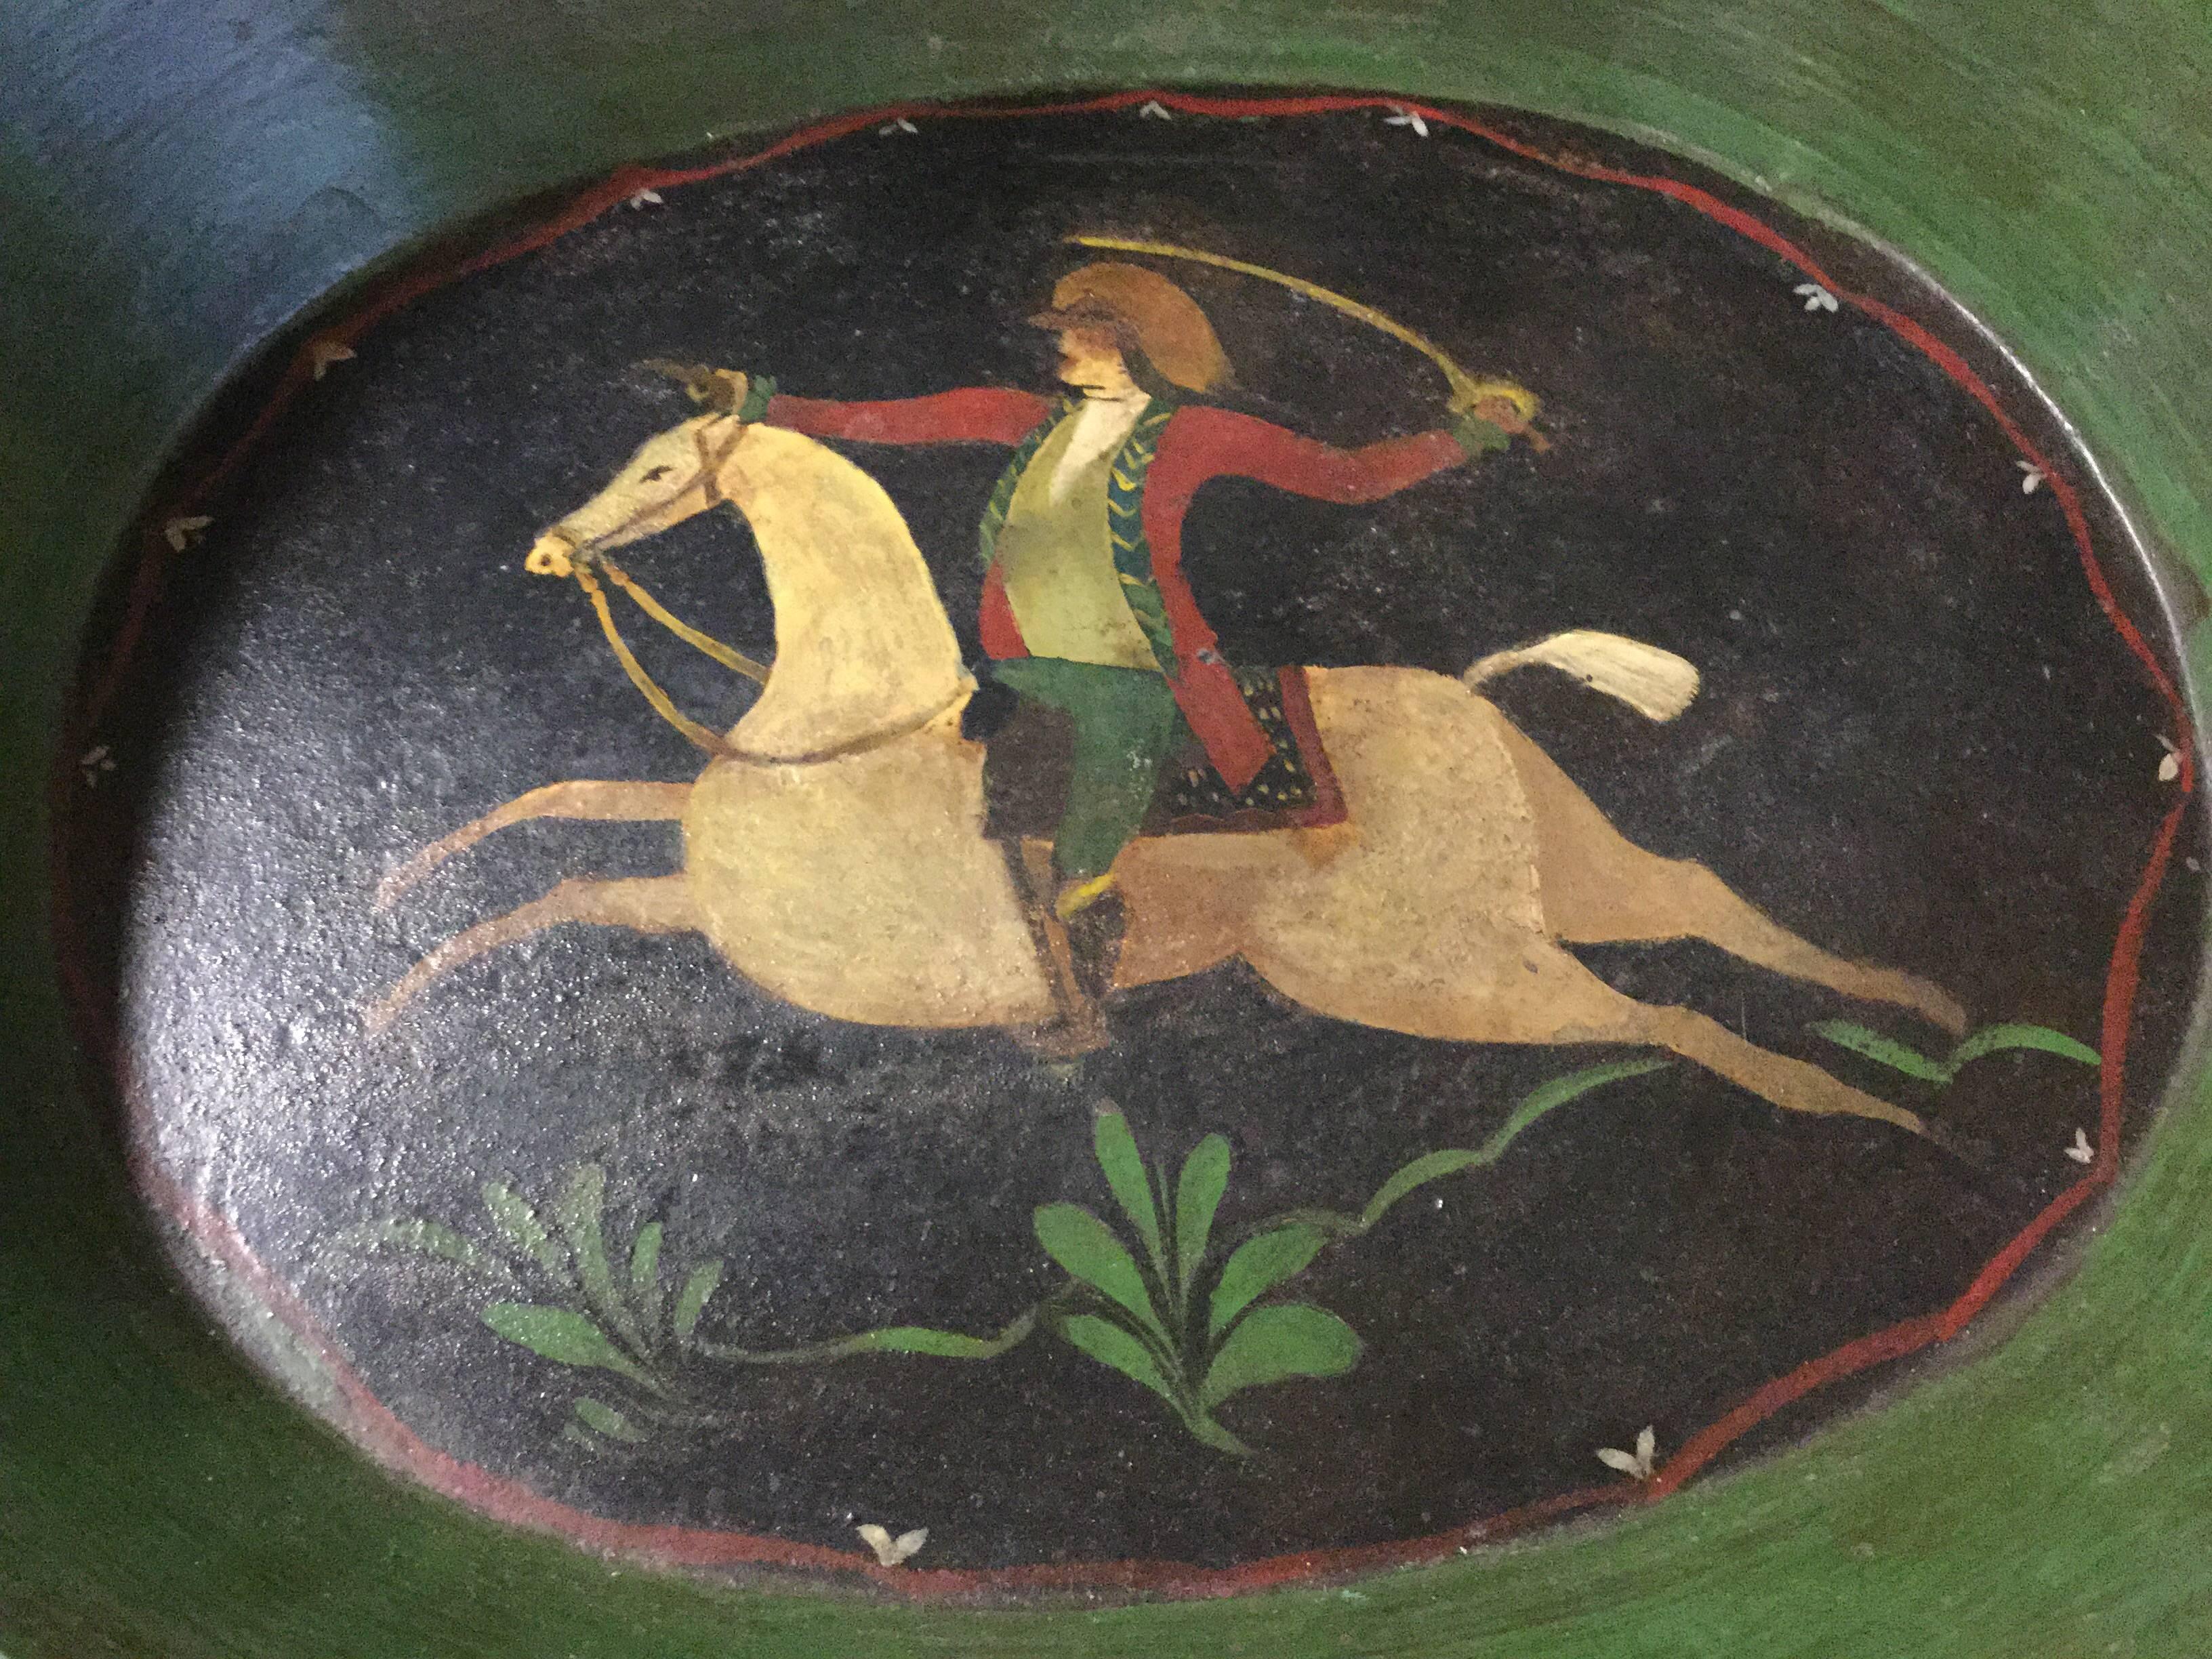 A very decorative antique French handled tray depicting a sword wielding soldier on a charging horse. In very good, all original condition, with vivid paint and all-over fine age patina. 